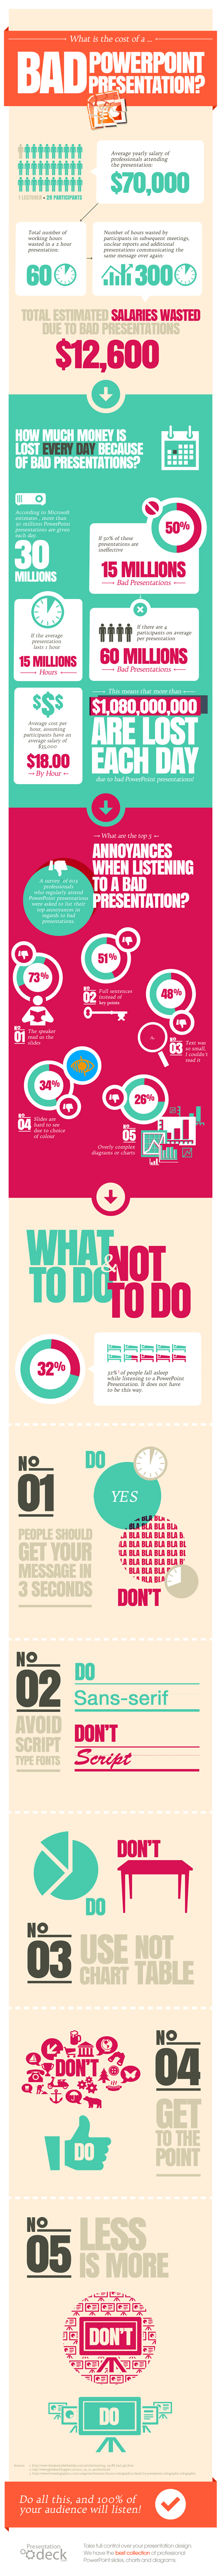 What Is the Cost of a Bad PowerPoint Presentation? Infographic